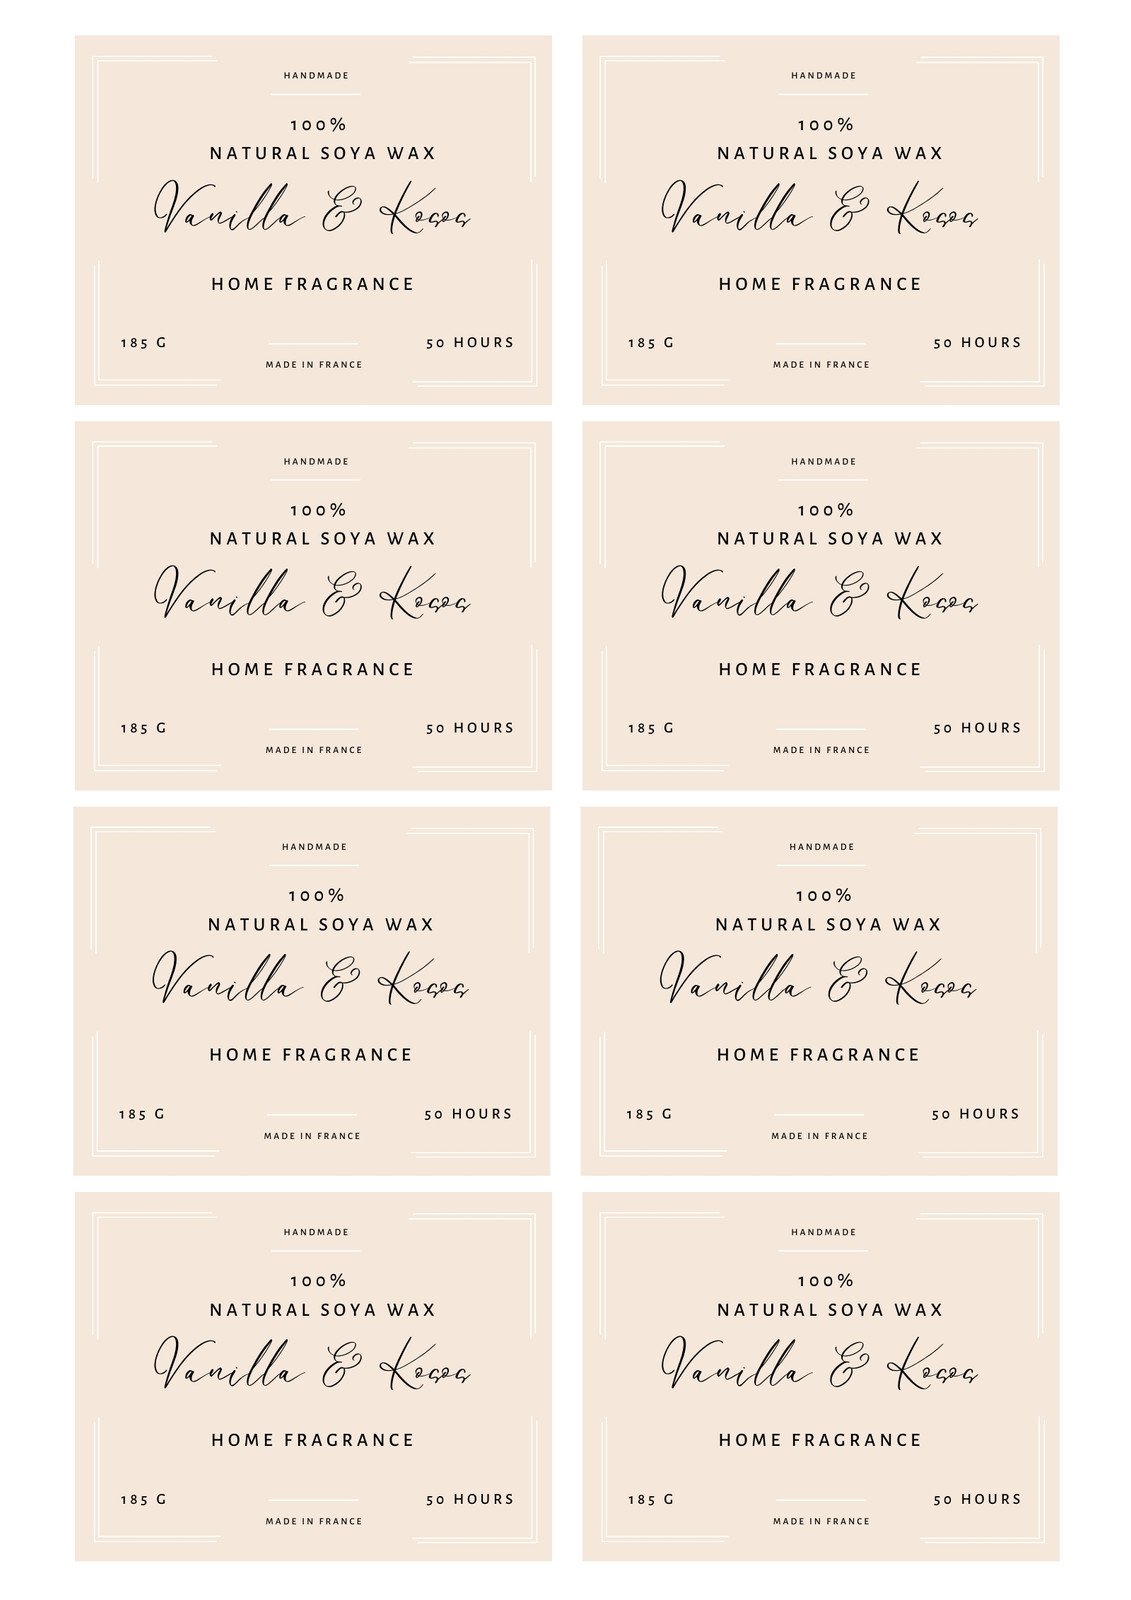 DIY Canva Candle Label Template